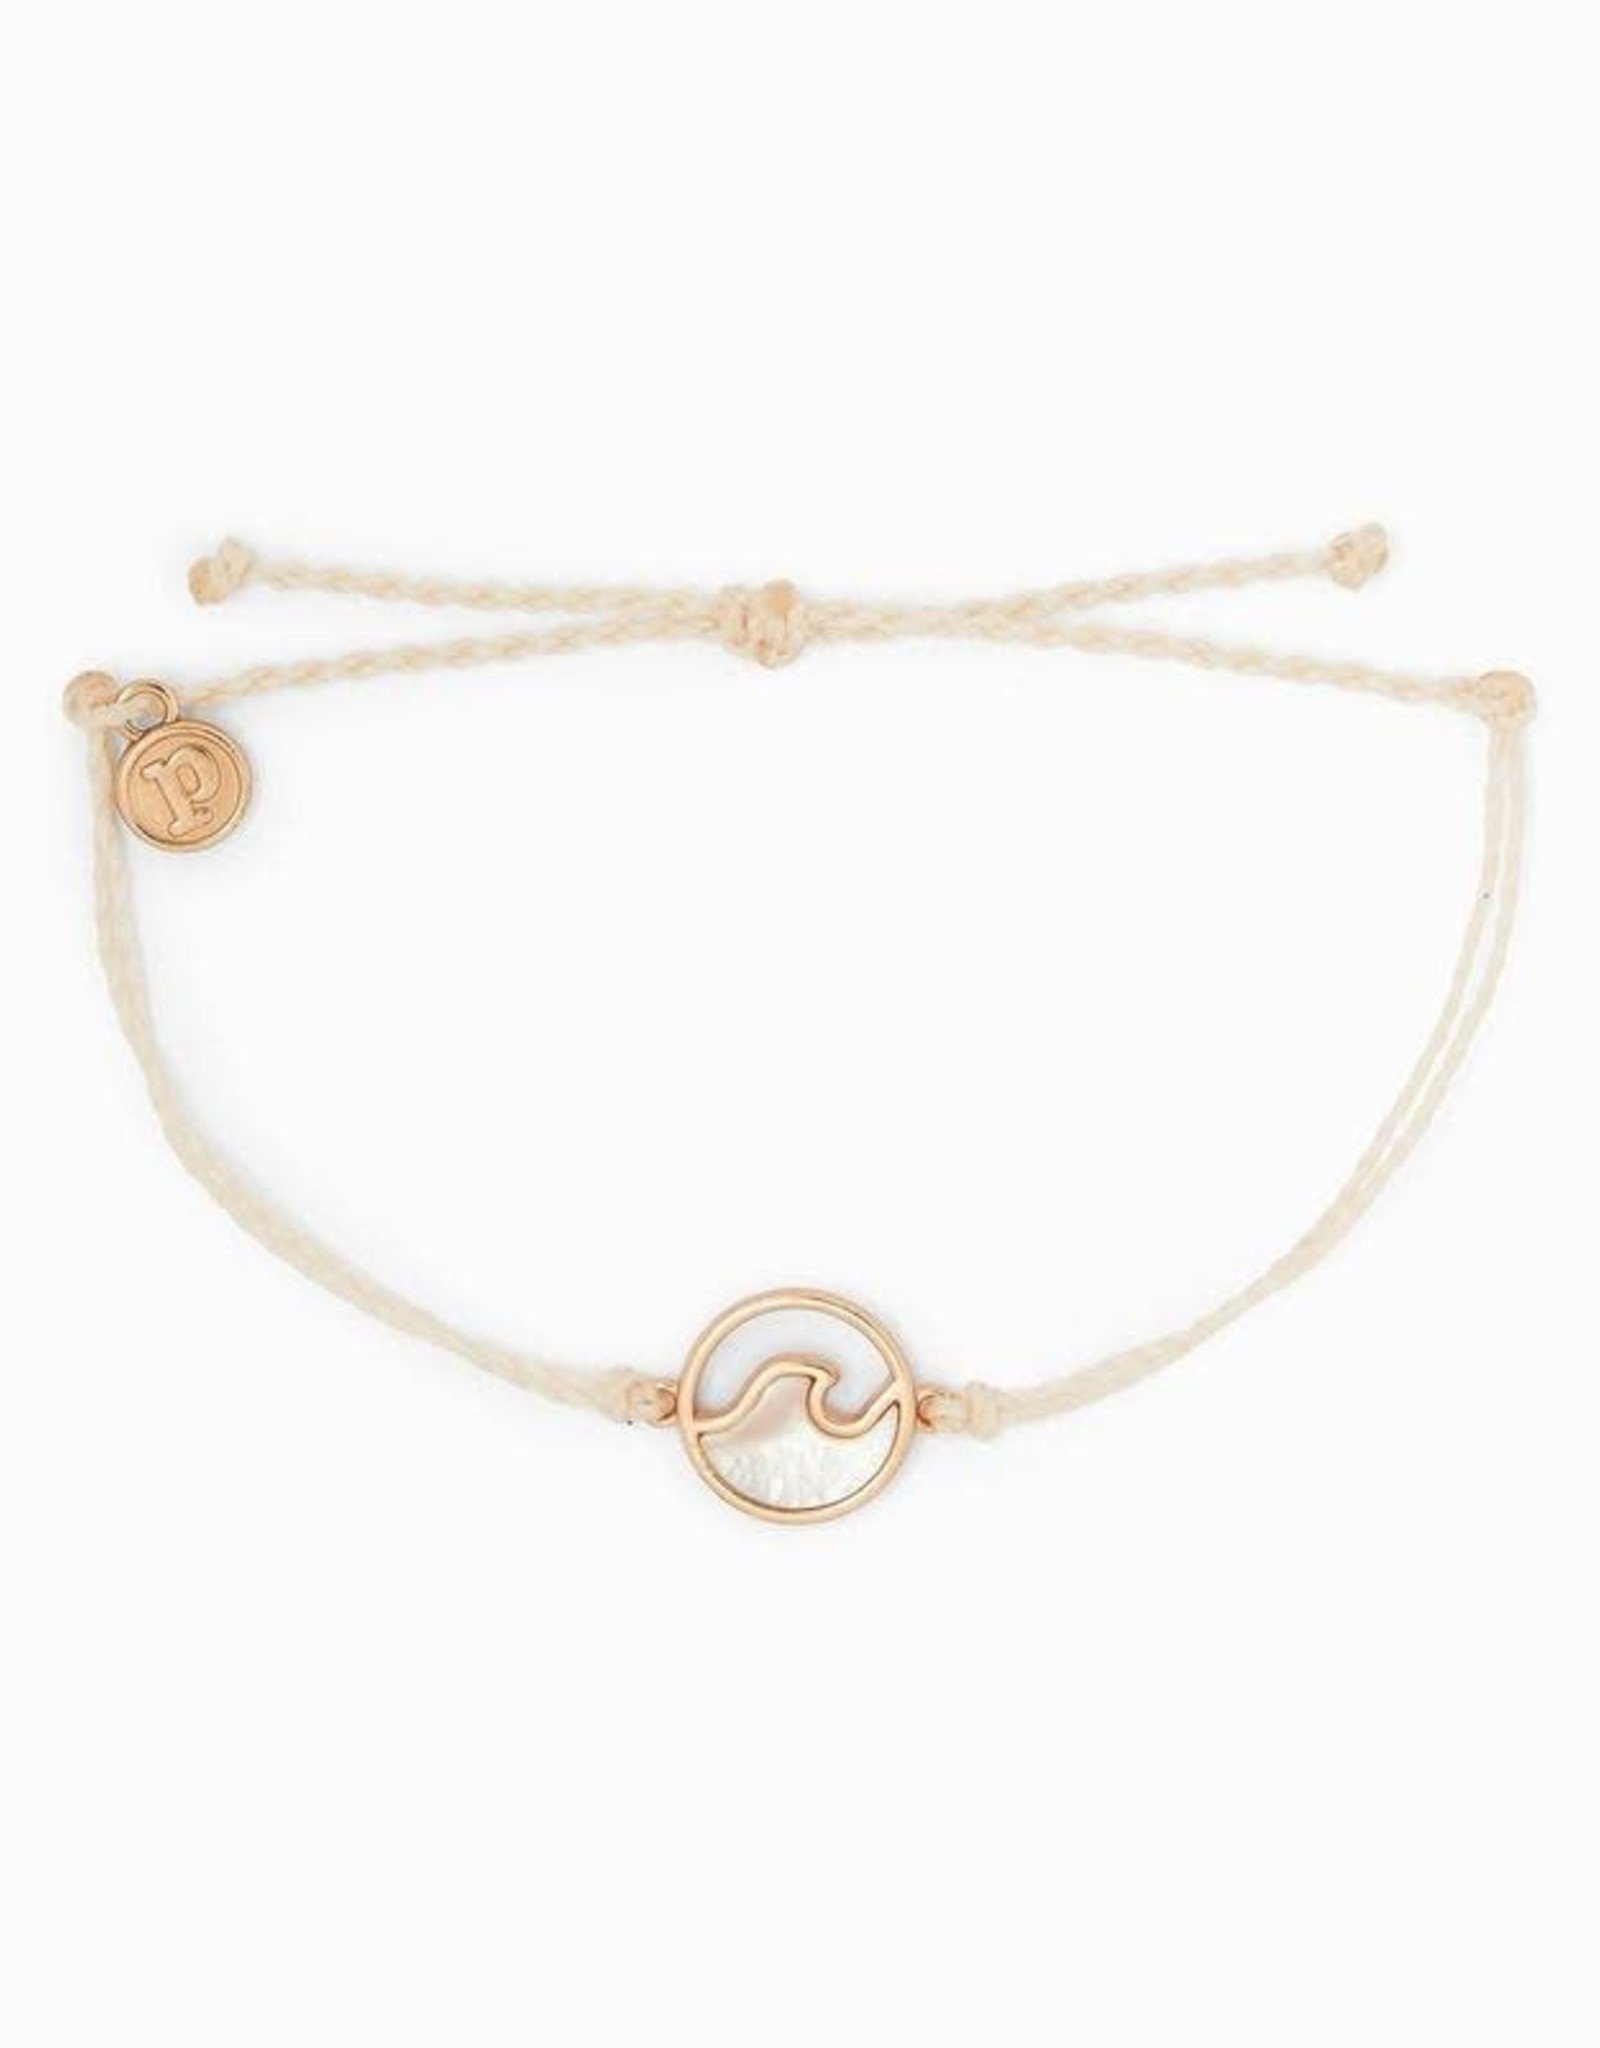 Pura Vida Delicate Wave Bracelet w/Silver or Rose Gold-Plated Brass Casting Adjustable Braided Band Waterproof